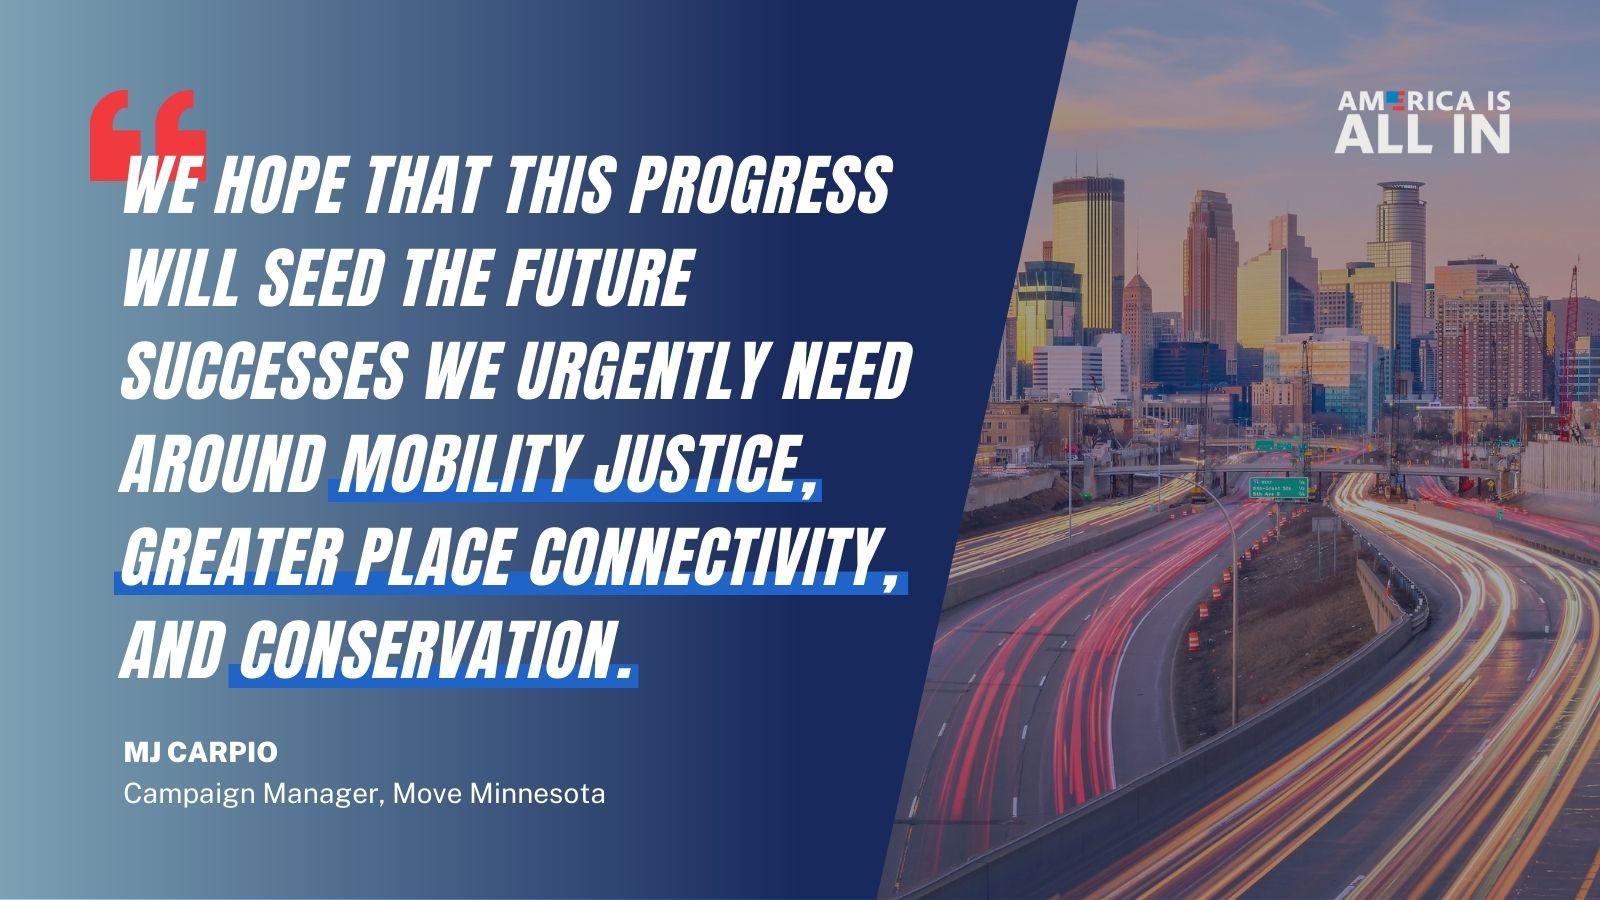 Image with the quote "we hope that this progress will seed the future successes we urgently need around mobility justice, greater place connectivity, and conservation" by MJ Carpio, Campaign Manager, Move Minnesota